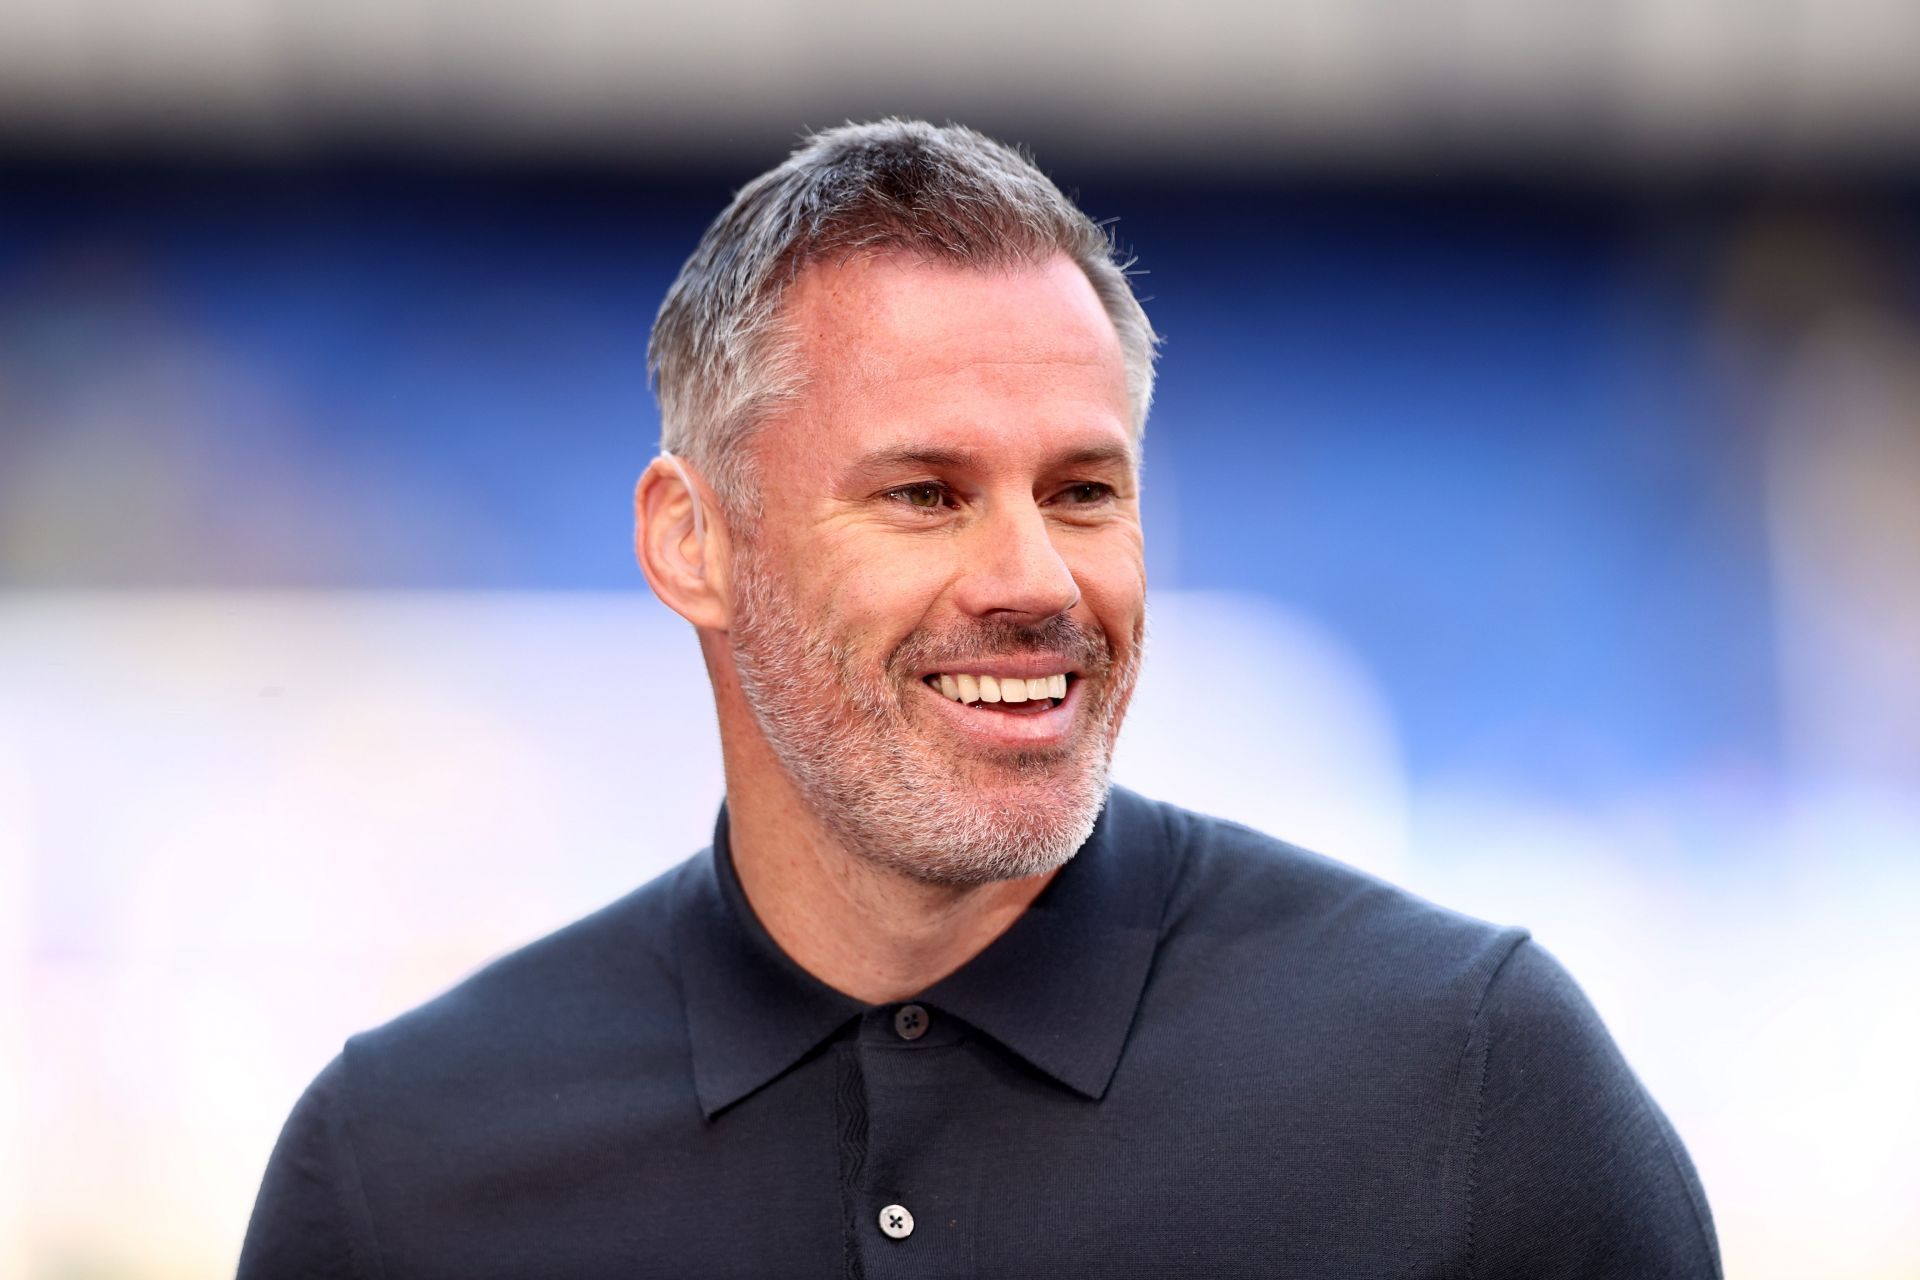 Jamie Carragher thinks Declan Rice would suit the Red Devils more.